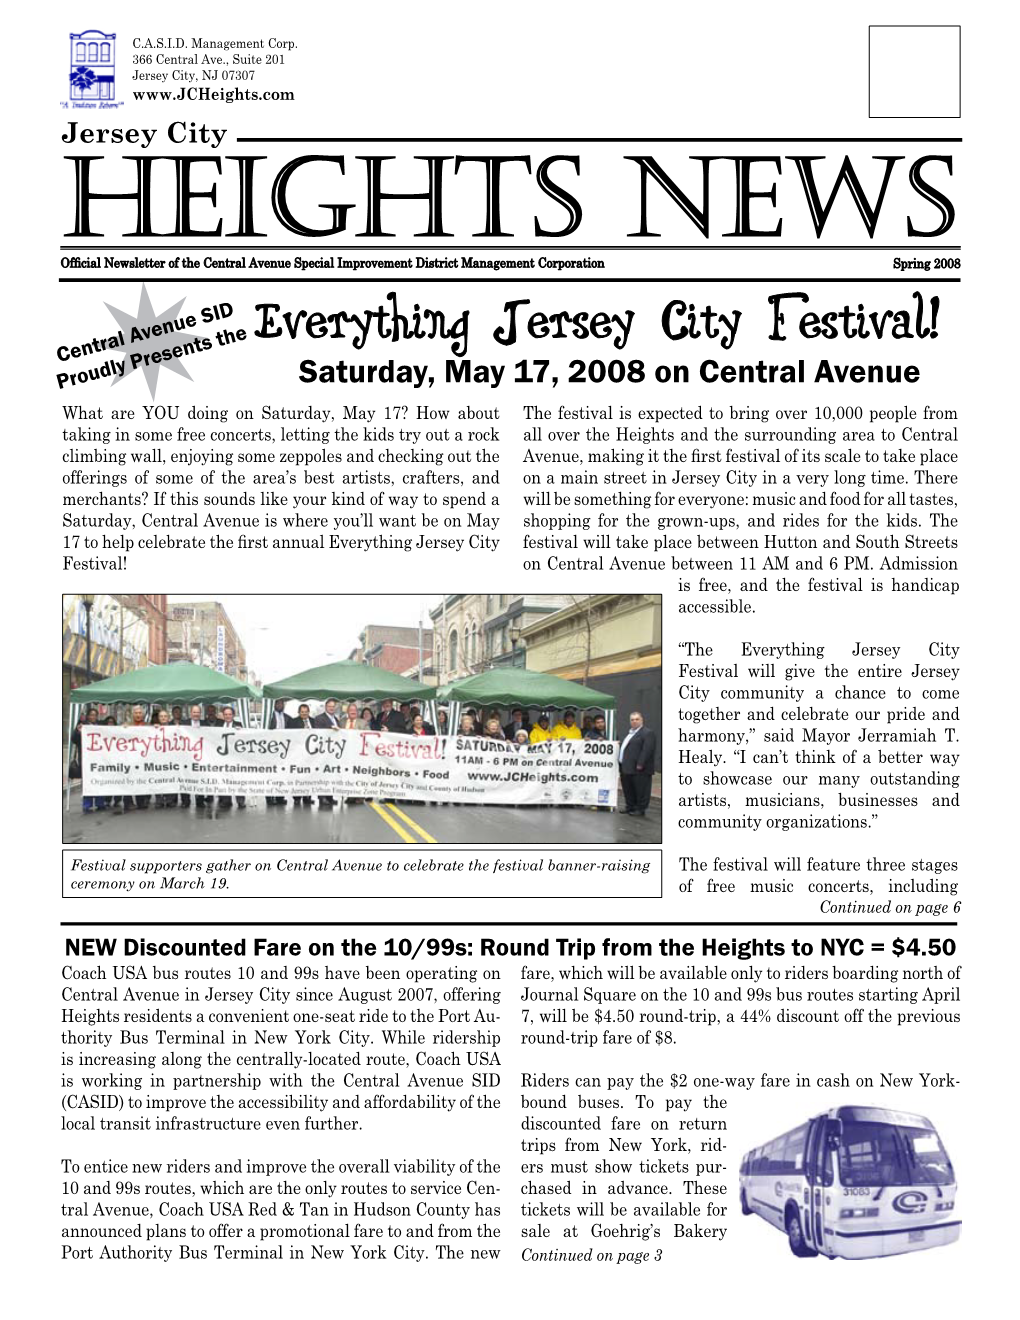 Spring 2008 Heights News 2 Central Avenue SID Message from the Board of Trustees Management Corp